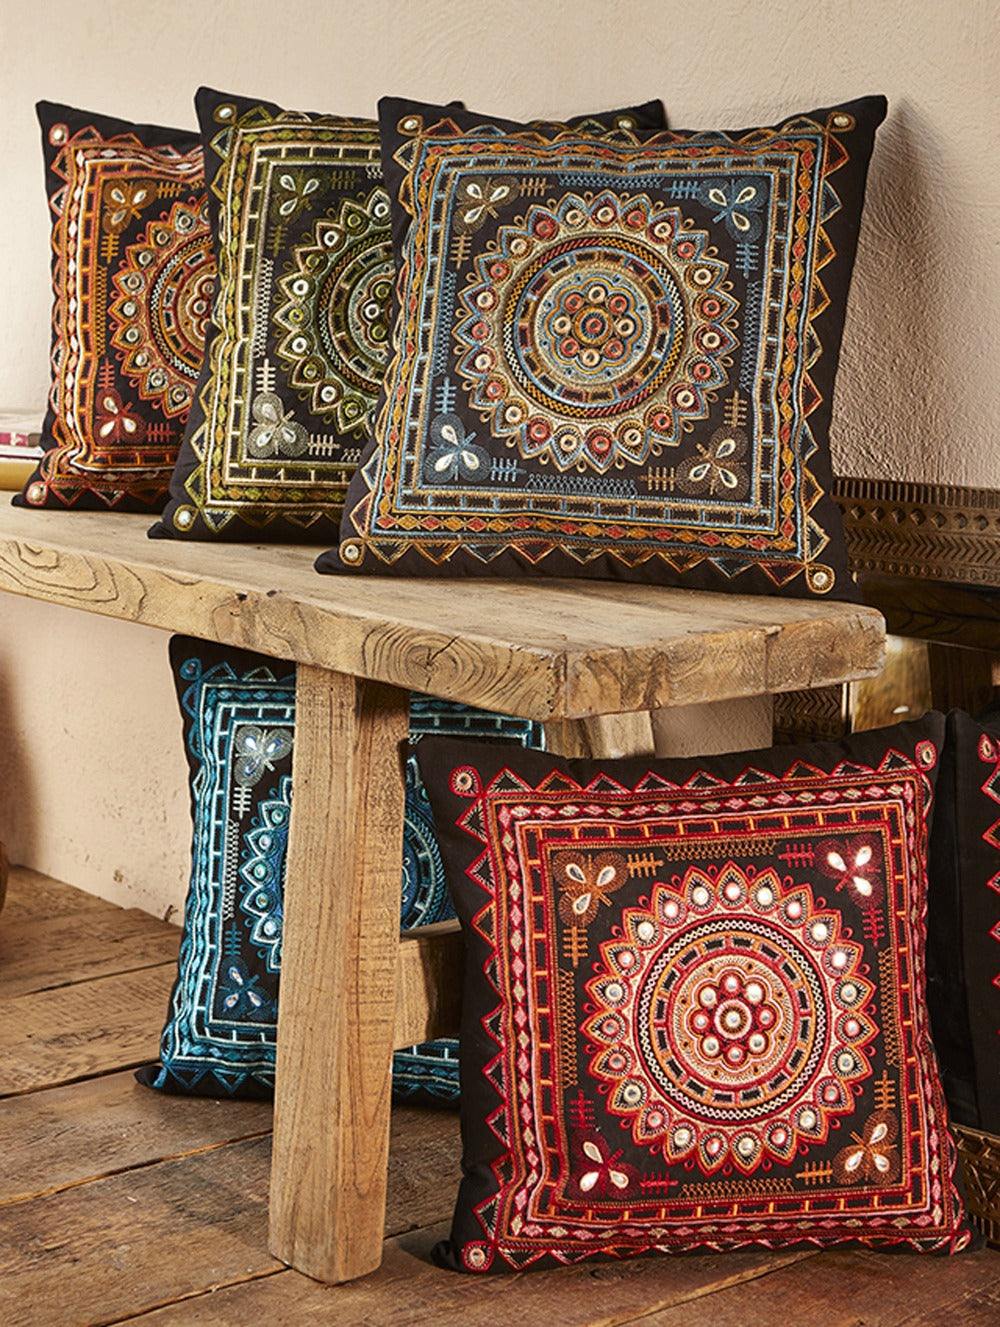 Rajasthan Embroidered Cushion Cover Available In 4 Colours 45 cm x 45 cm